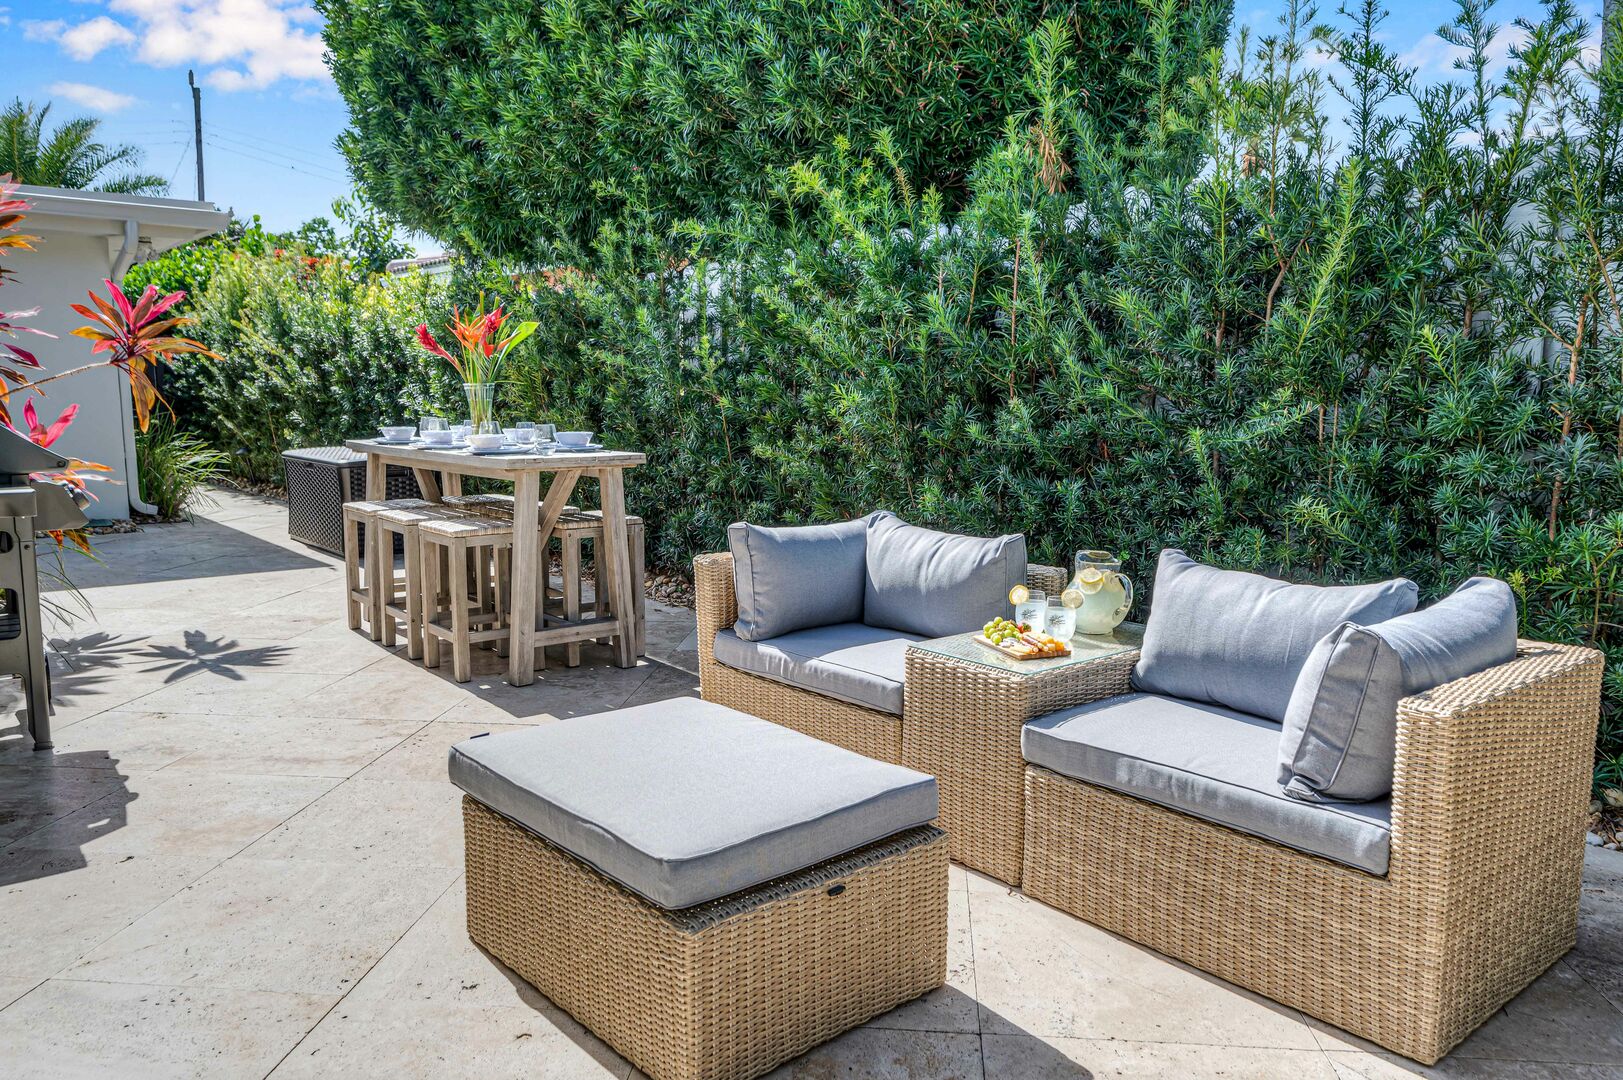 The outdoor oasis includes a sitting area, dining space, grill and quick access to the kitchen.